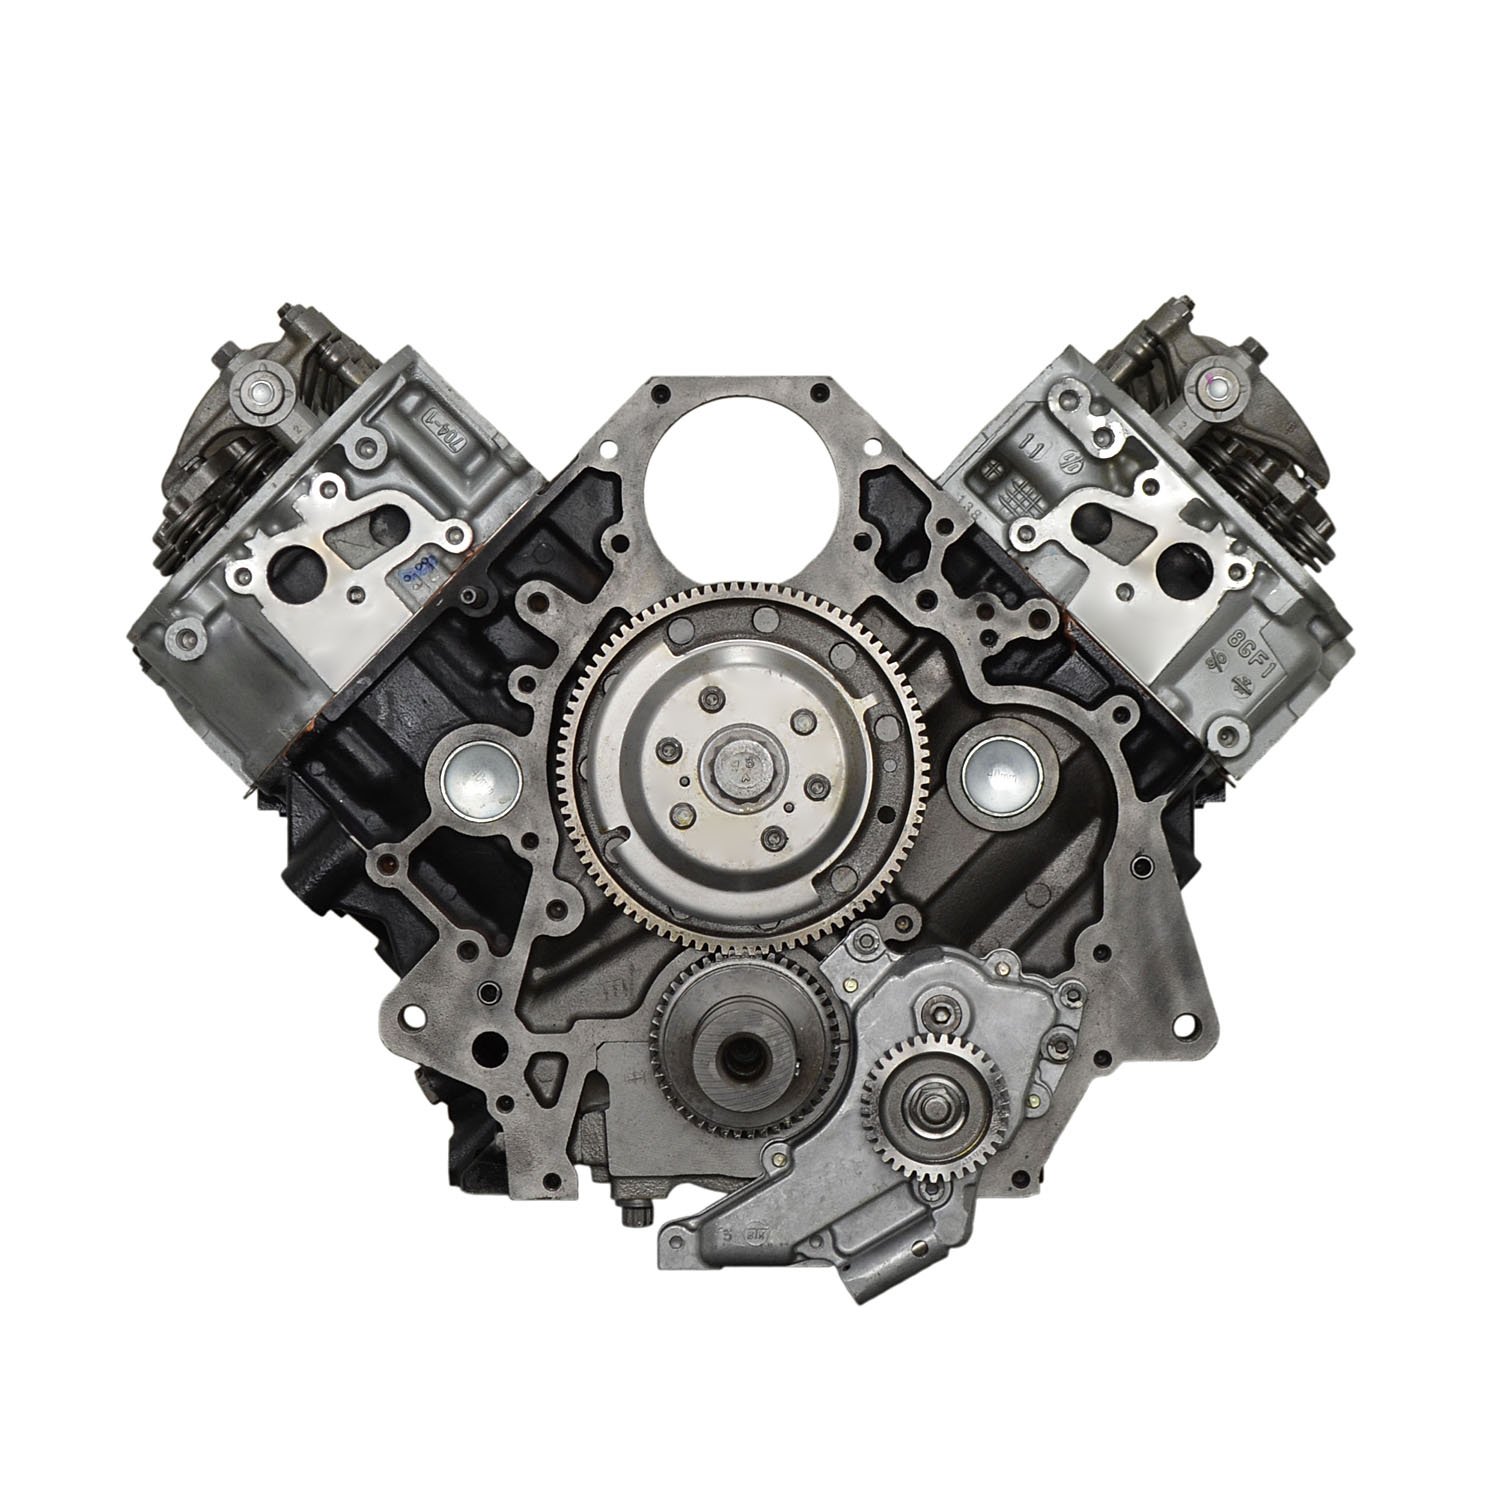 Remanufactured Crate Engine for 2007-2010 Chevy/GMC Light Duty